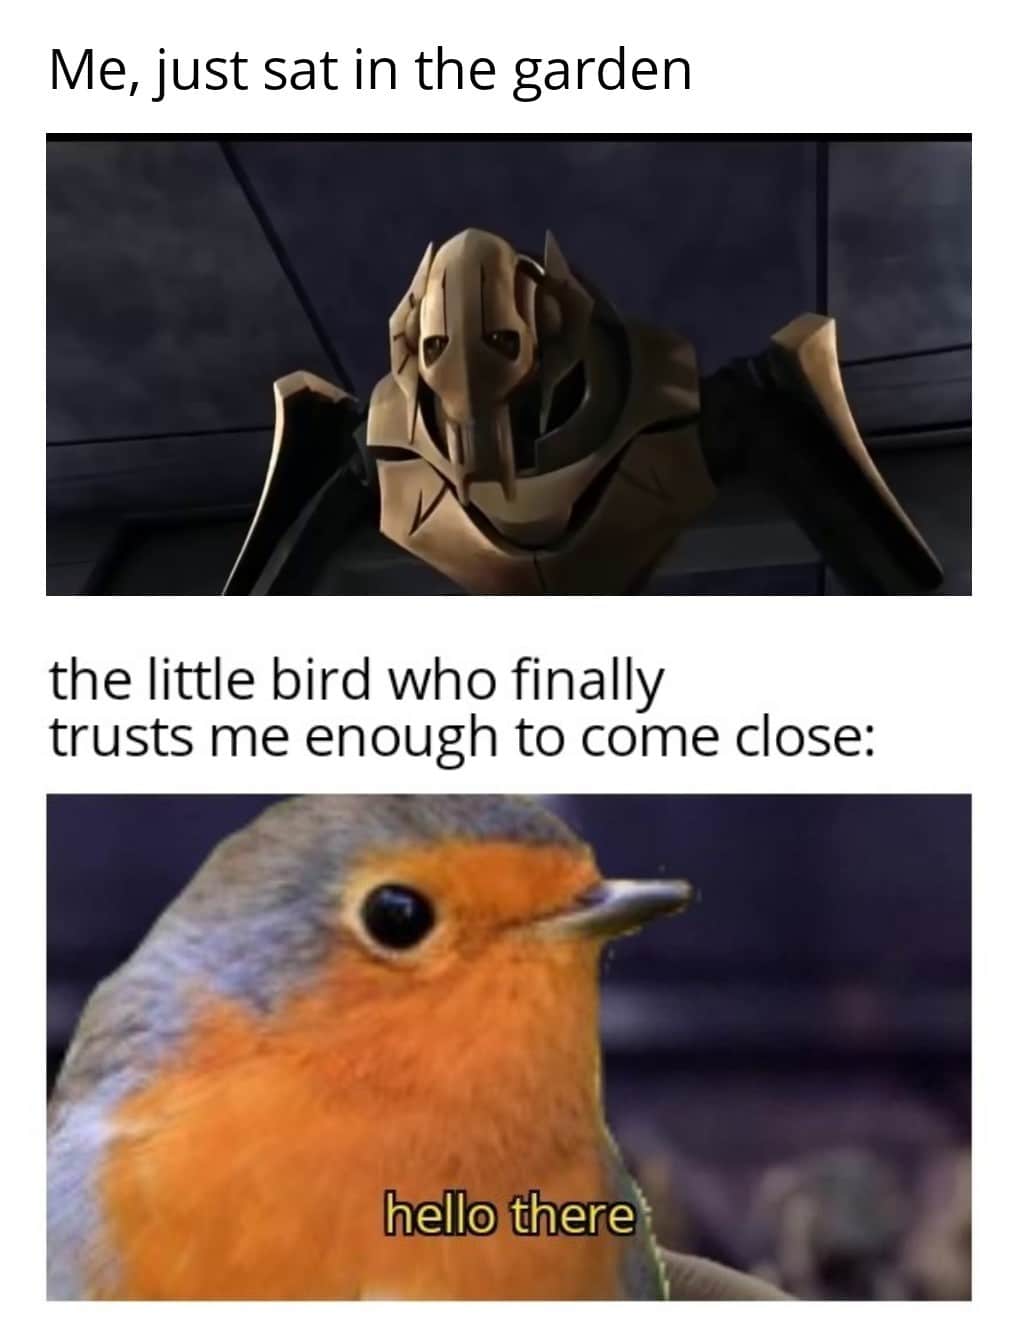 Cute, wholesome memes, Kenobi Wholesome Memes Cute, wholesome memes, Kenobi text: Me, just sat in the garden the little bird who finally trusts me enough to come close: lhhél